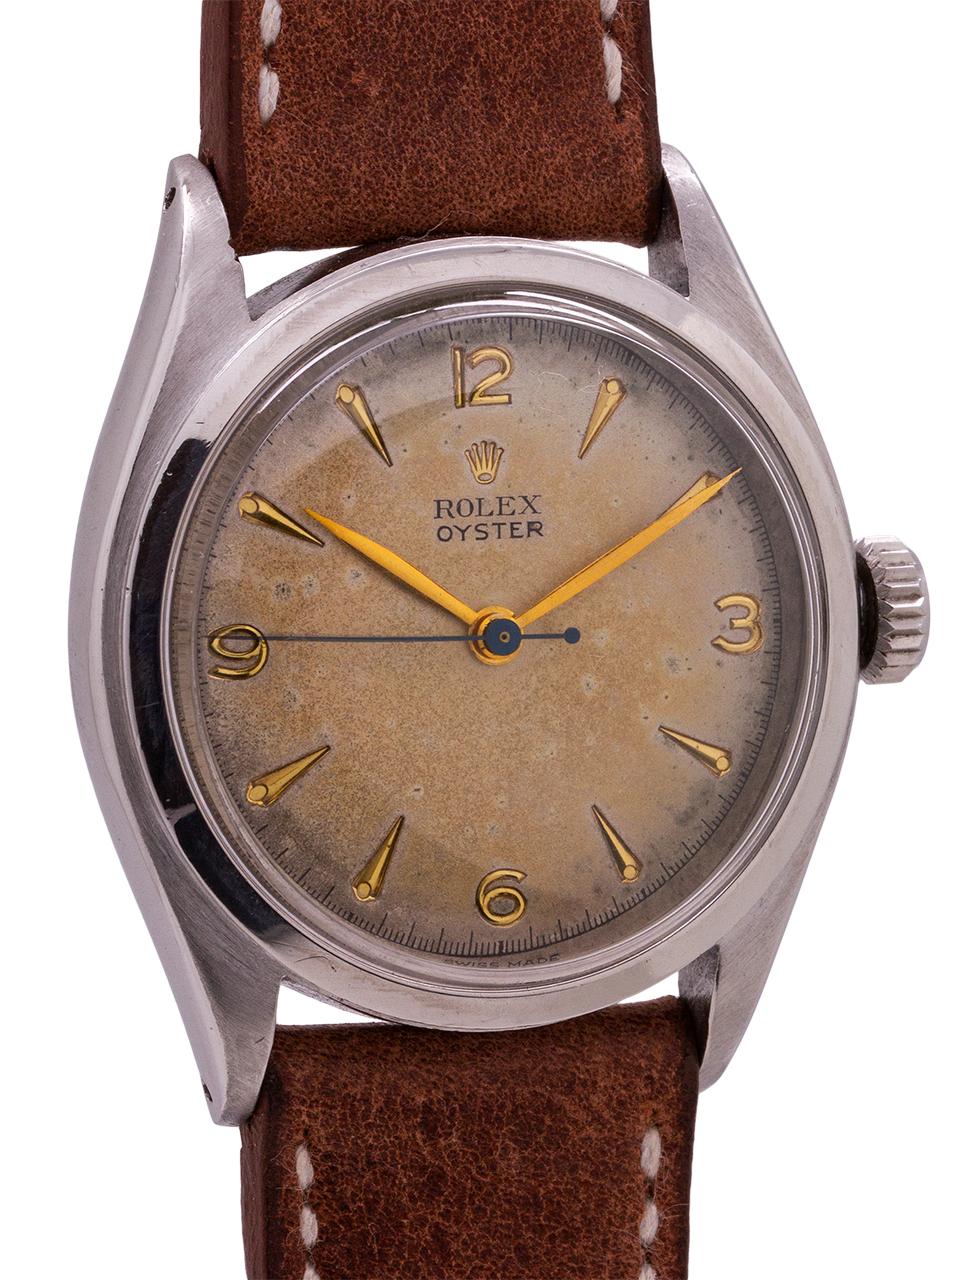 
Rolex Oyster ref # 6022 in stainless steel, case serial # 761,xxx circa 1951. Featuring 34mm diameter case with smooth bezel and very pleasing patina’d original dial with gold embossed numeral and arrow indexes, and tapered gilt leaf style hands.